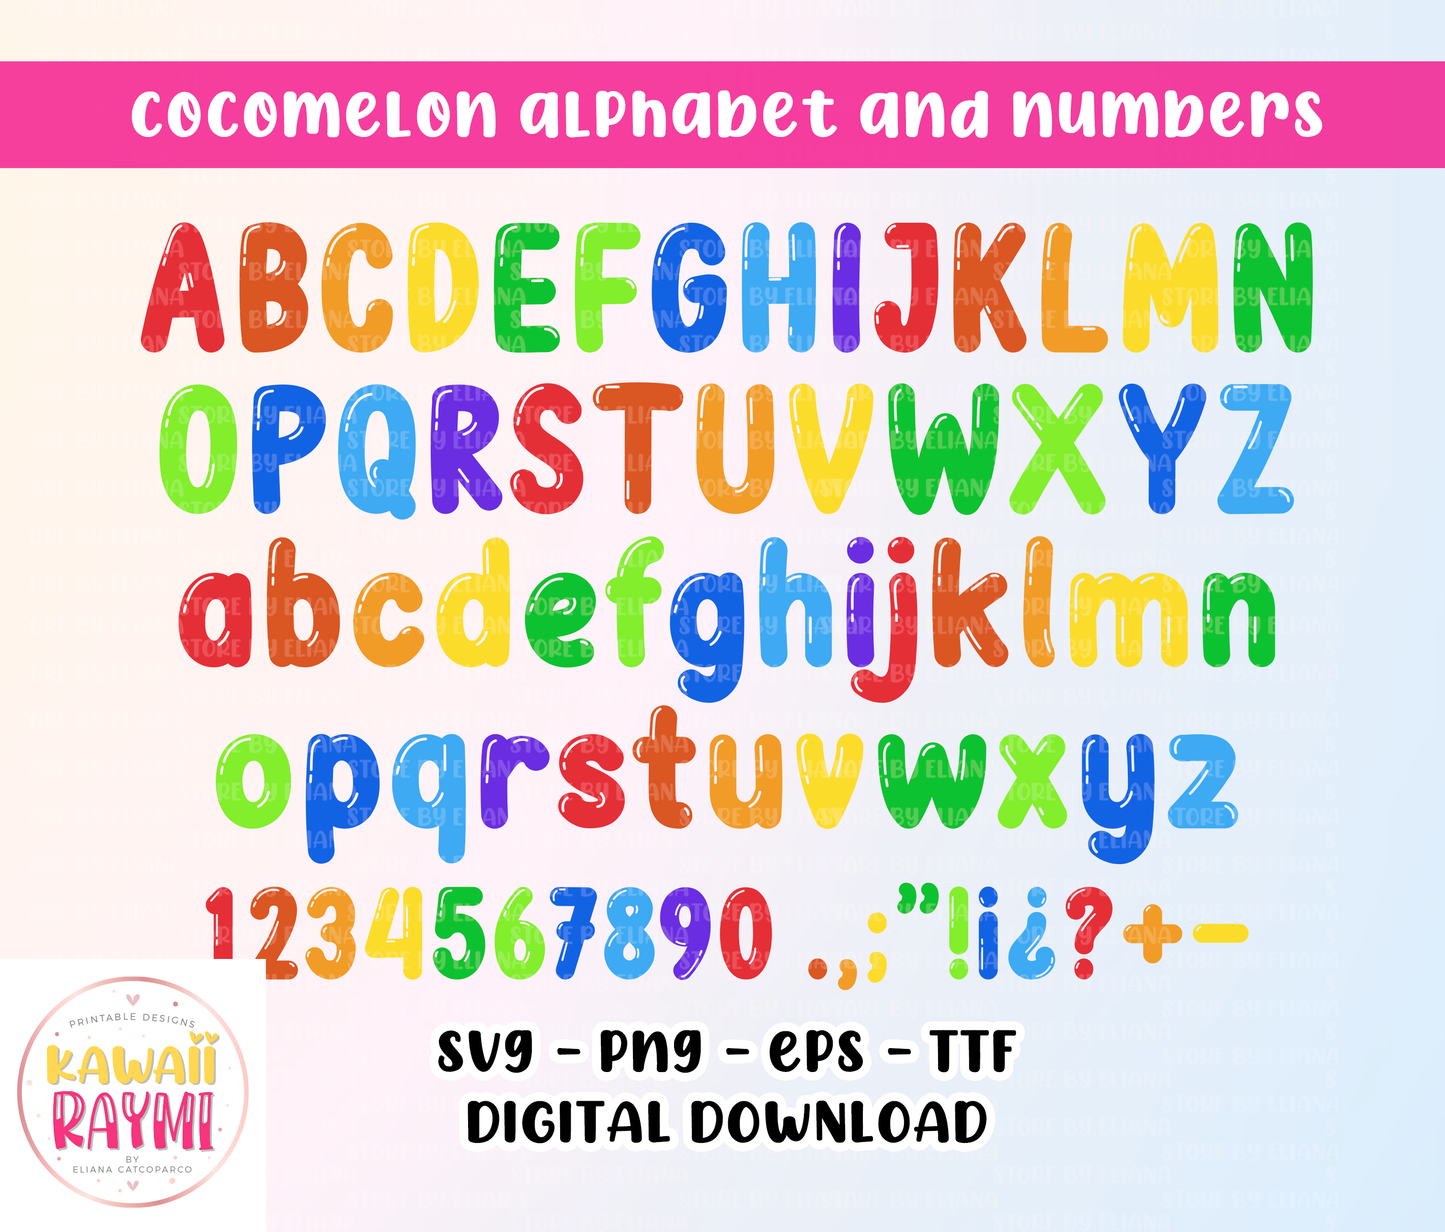 Alphabet and numbers Cocomelon font